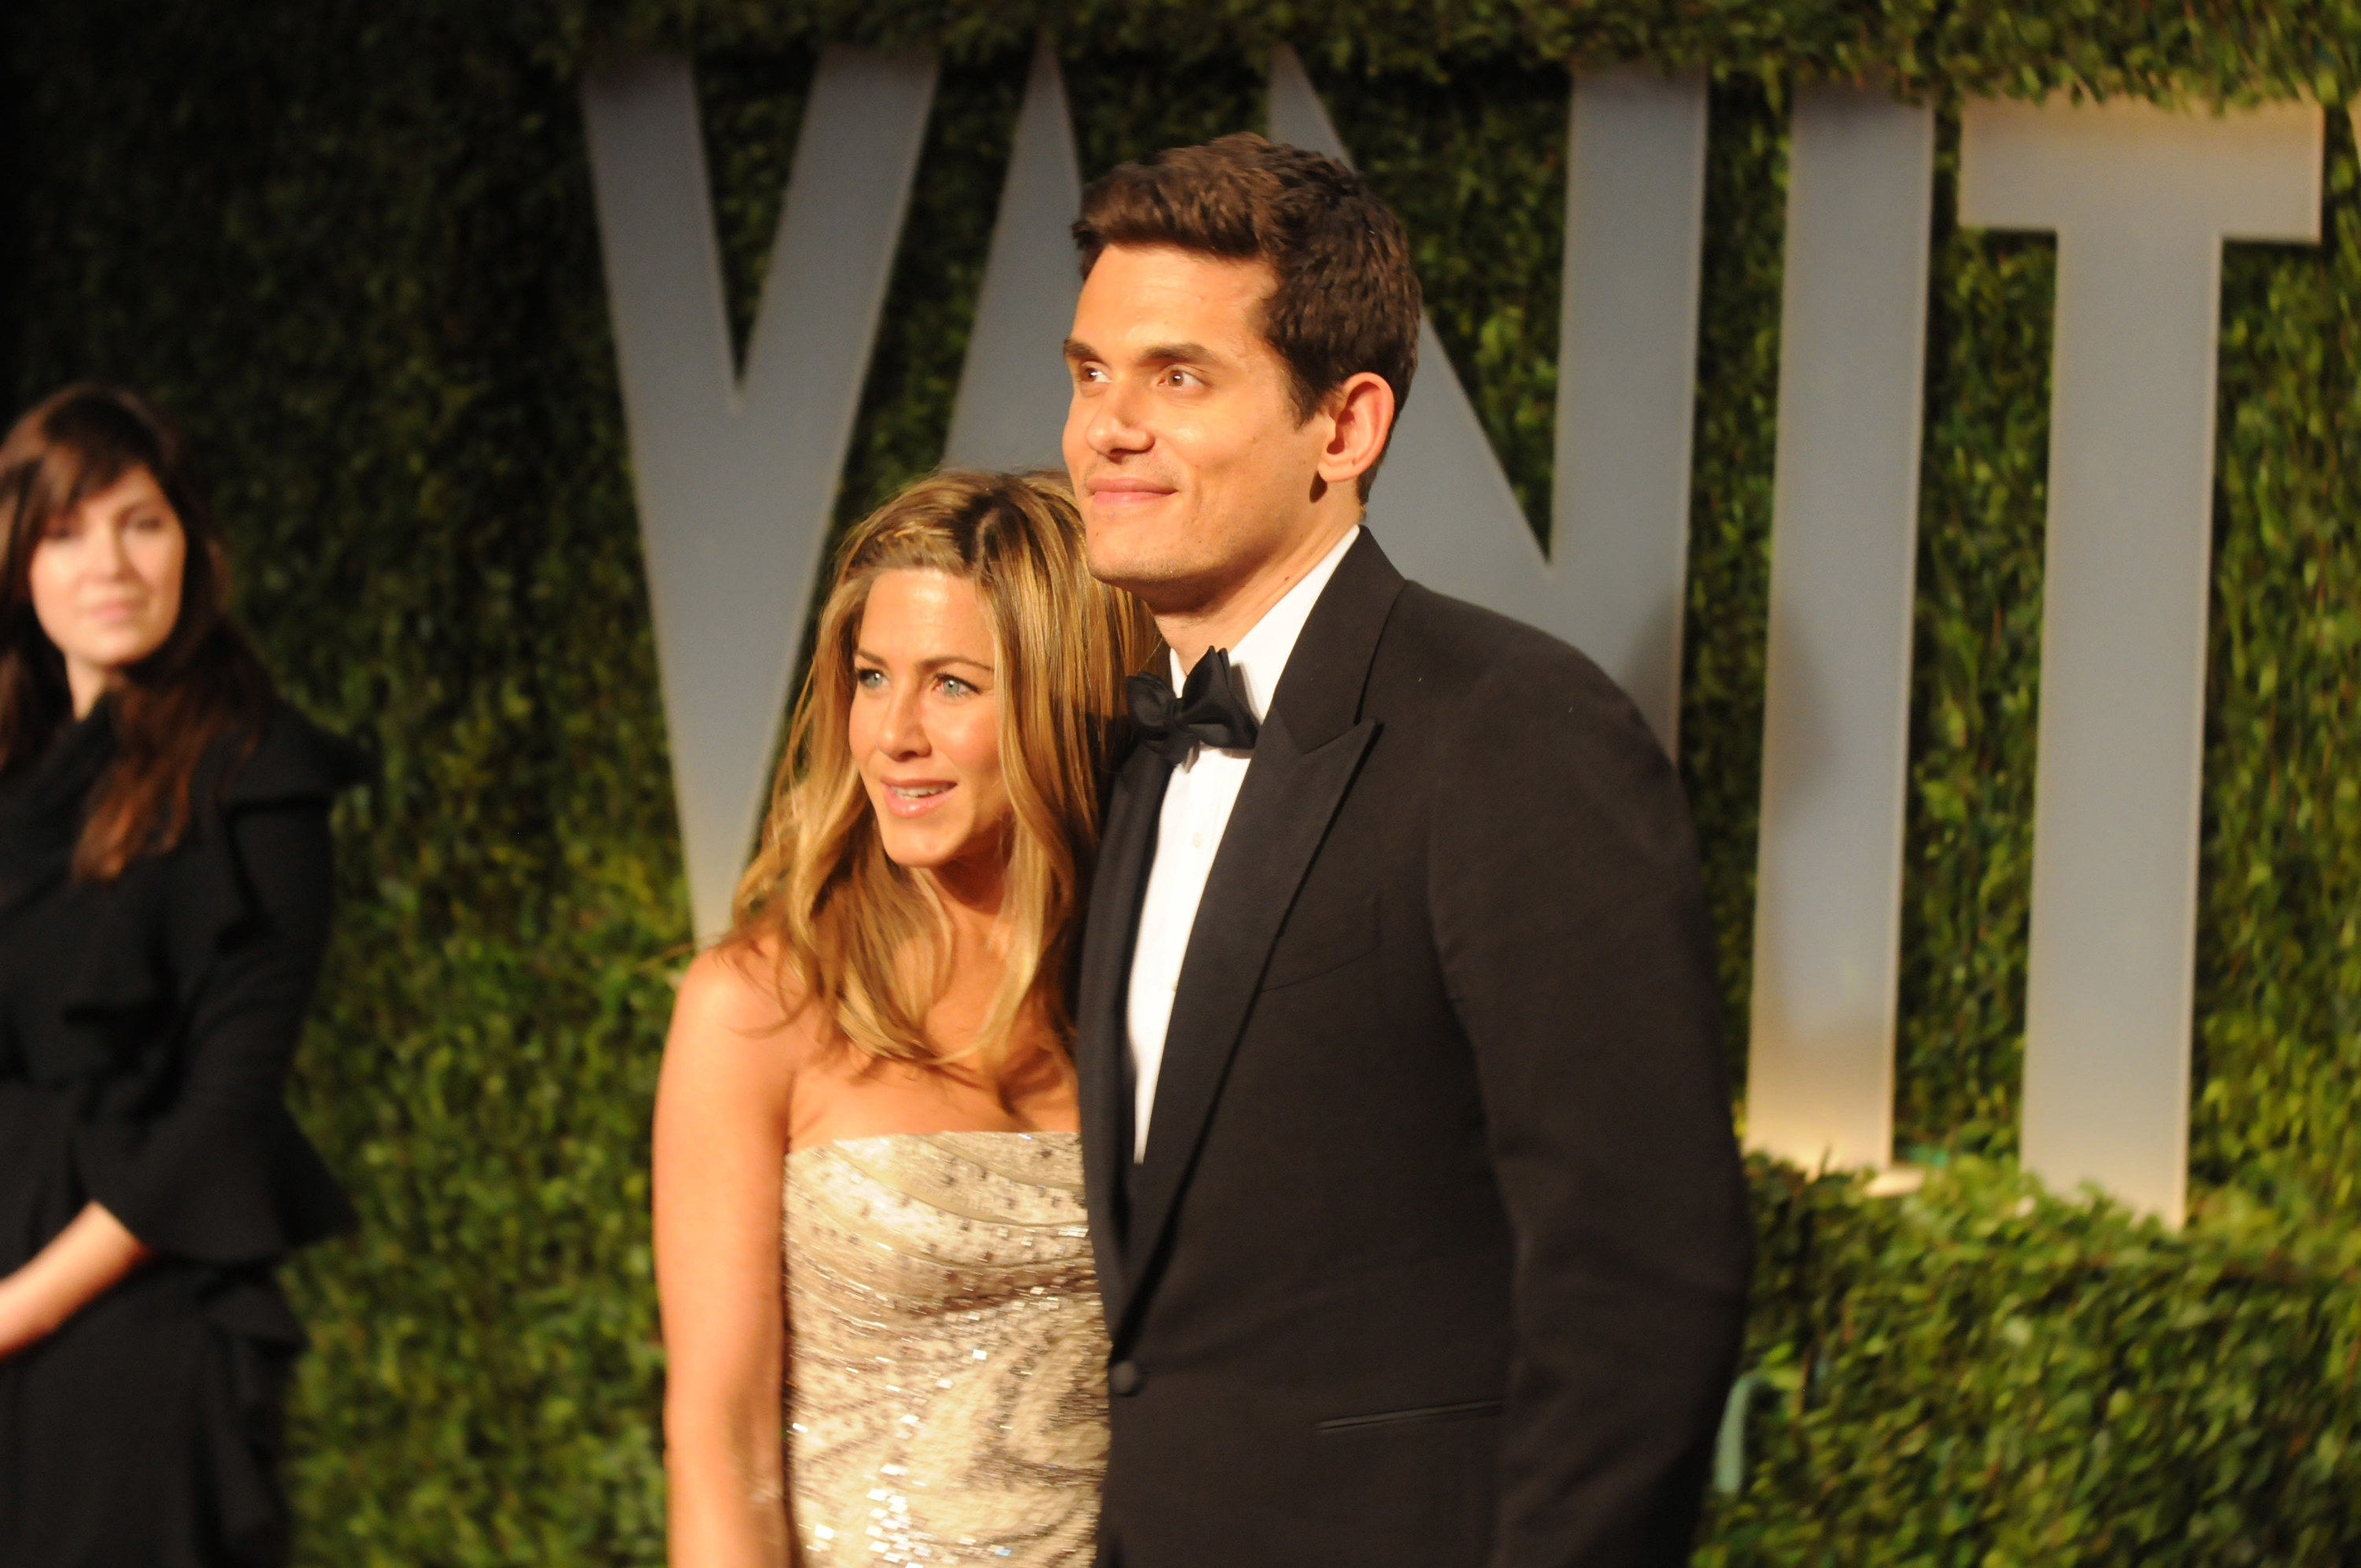 John Mayer and Jennifer Aniston in black tie clothing post arm in arm on the red carpet